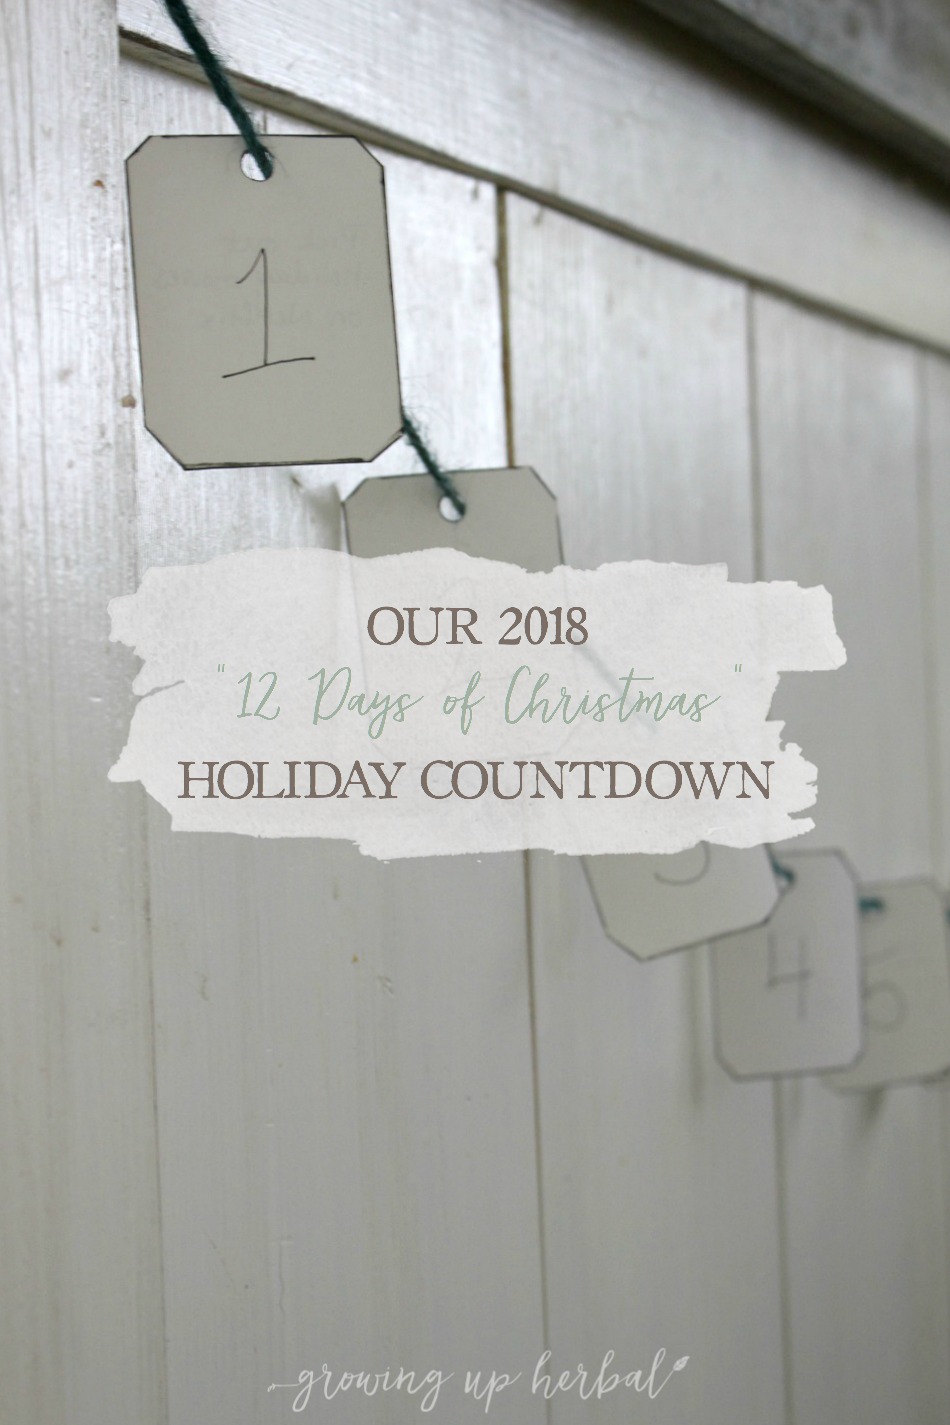 Our 2018 "12 Days of Christmas” Holiday Countdown | Growing Up Herbal | Checkout this 12 Days of Christmas holiday countdown, a shortened spinoff of a traditional Advent calendar. Learn how to make it and some example activities to include!